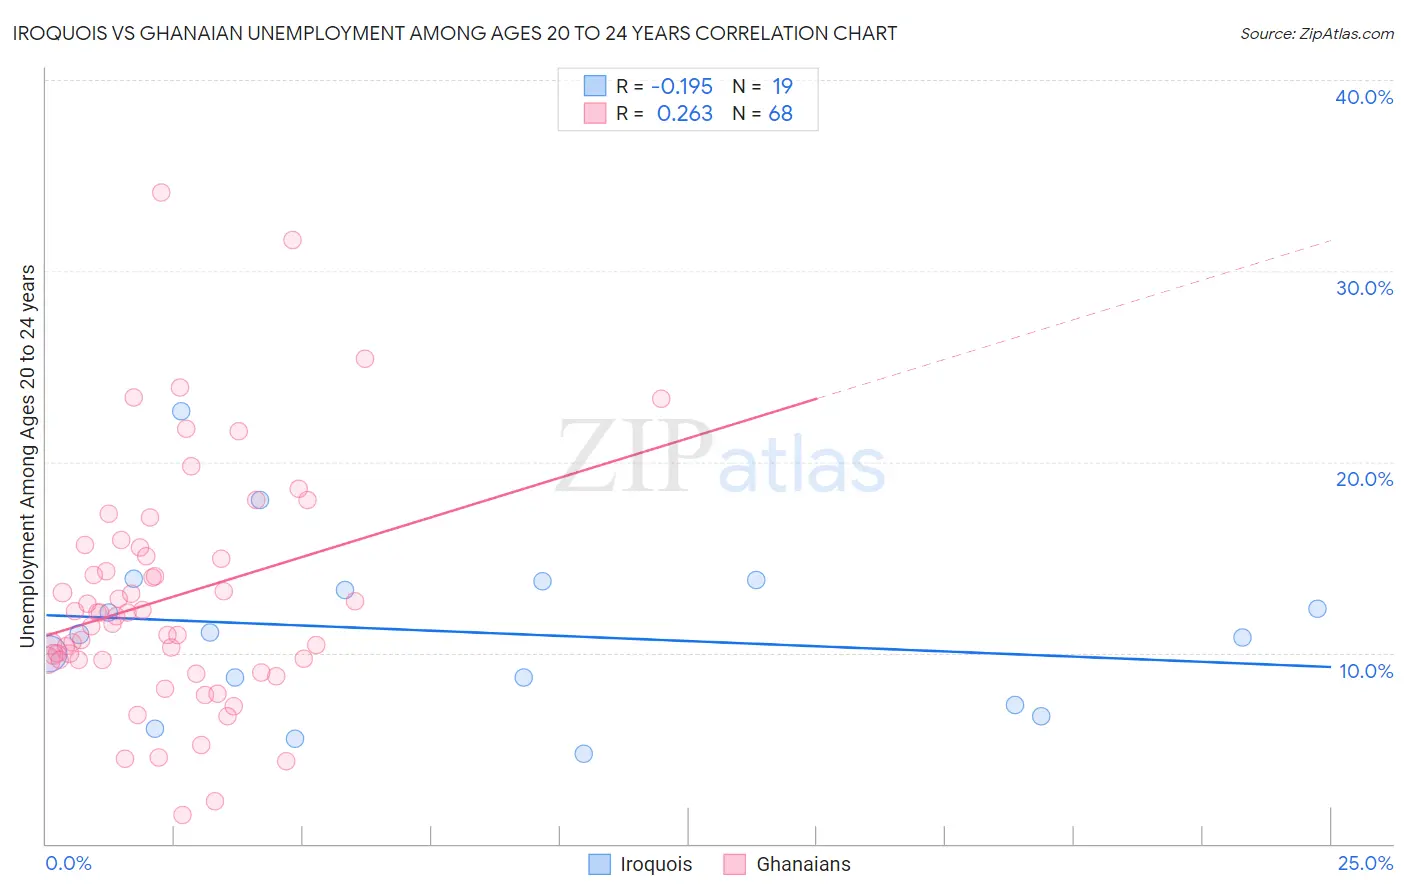 Iroquois vs Ghanaian Unemployment Among Ages 20 to 24 years